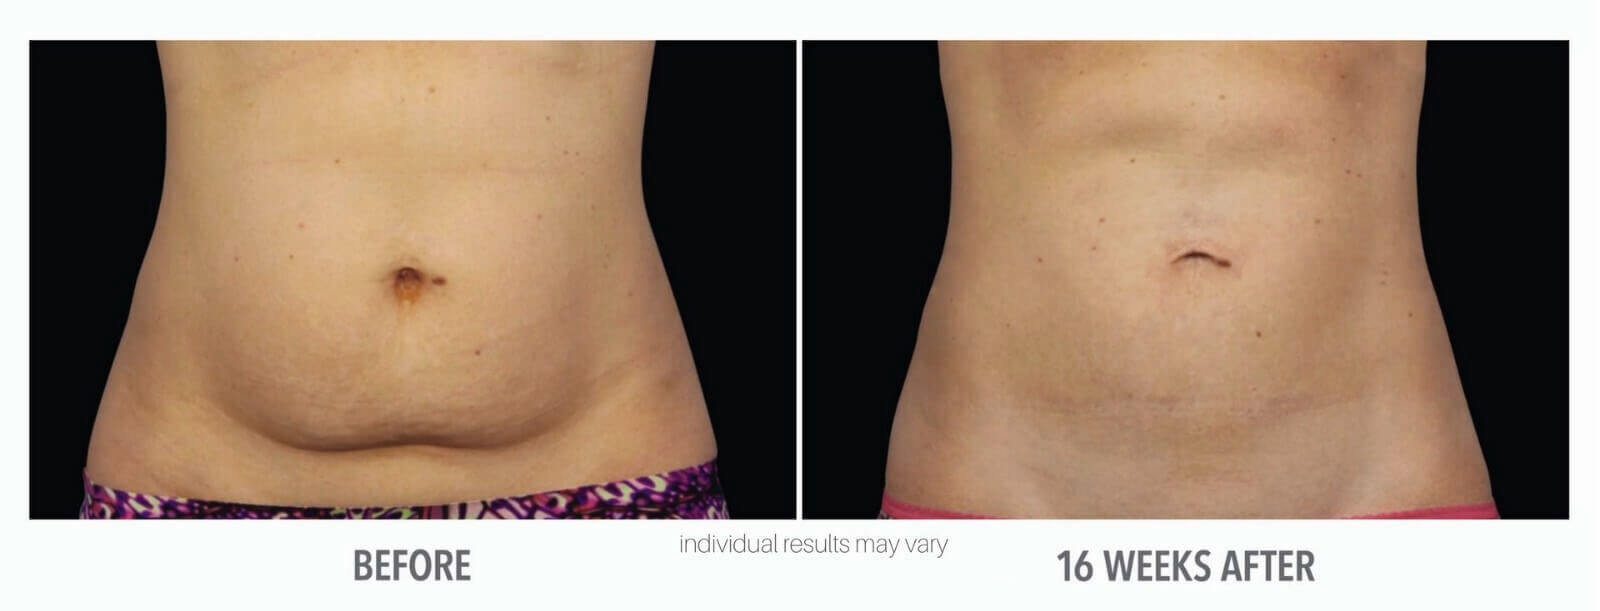 Coolsculpting Stomach before and after